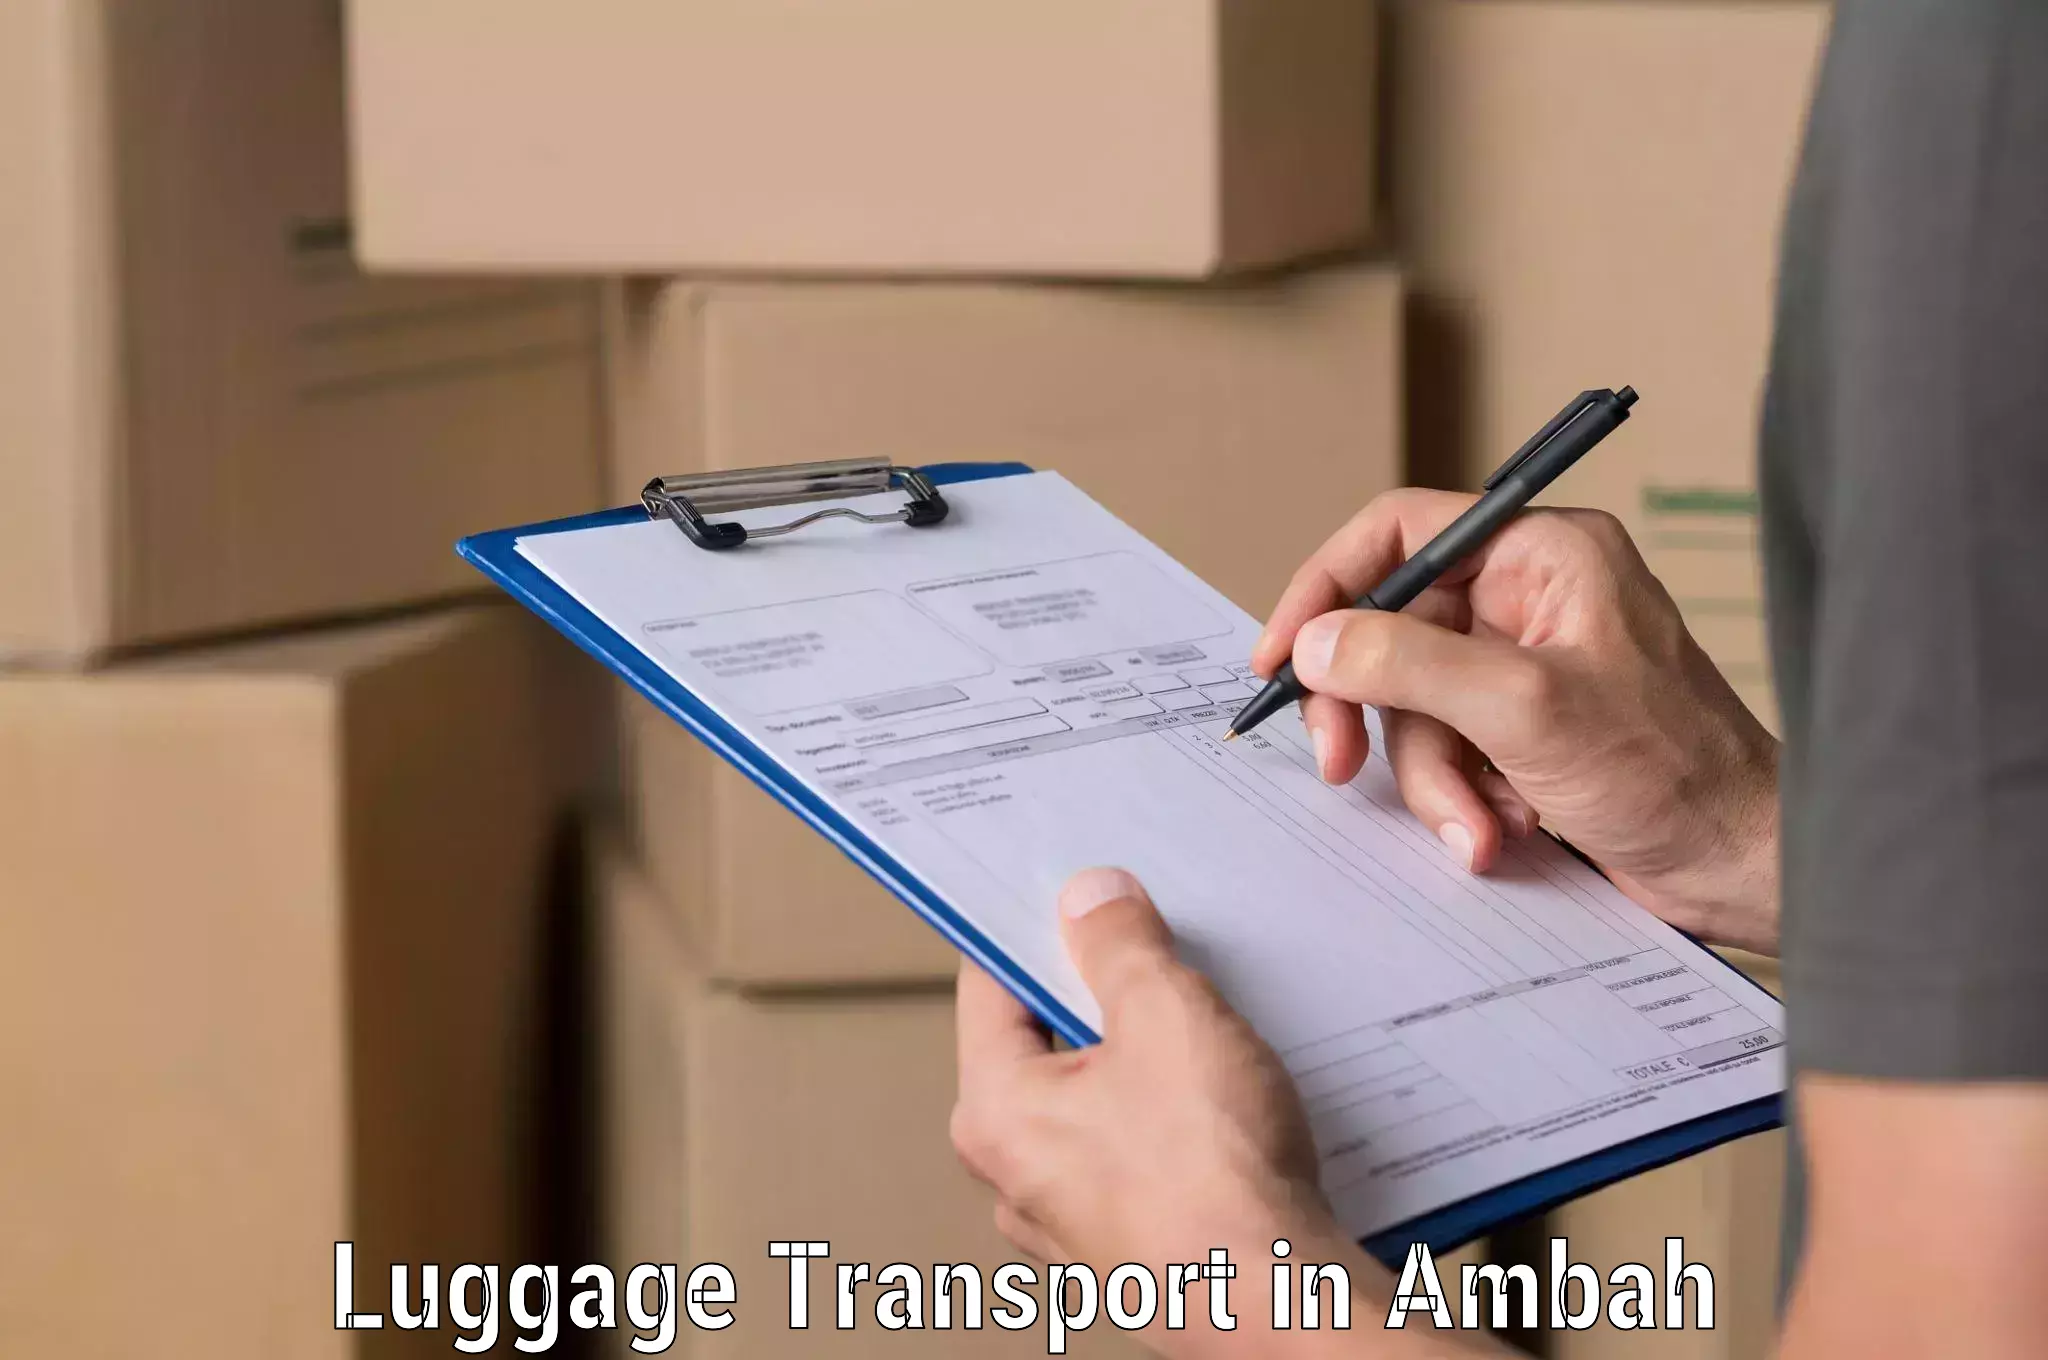 Business luggage transport in Ambah